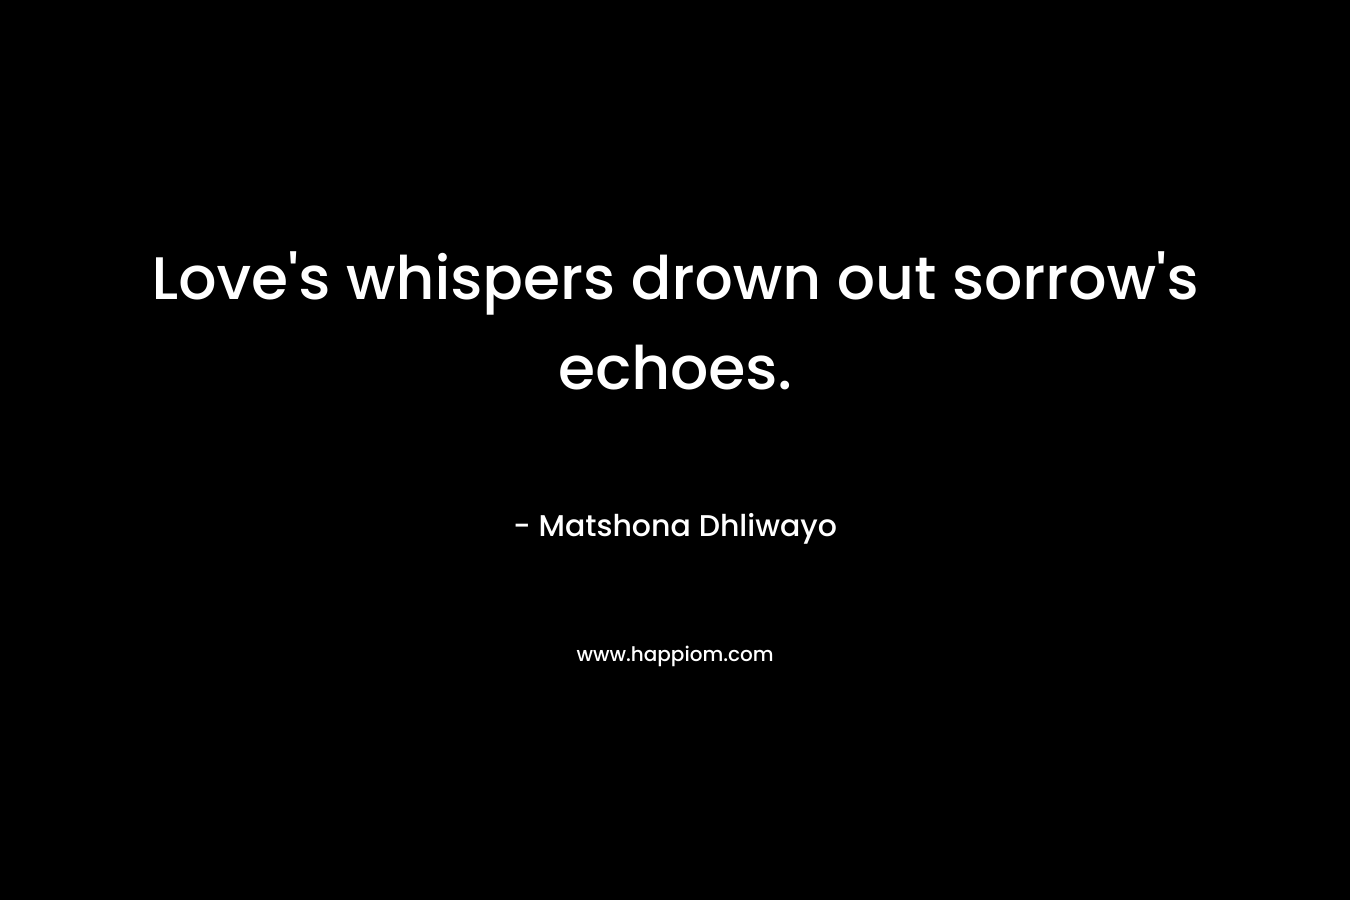 Love’s whispers drown out sorrow’s echoes. – Matshona Dhliwayo